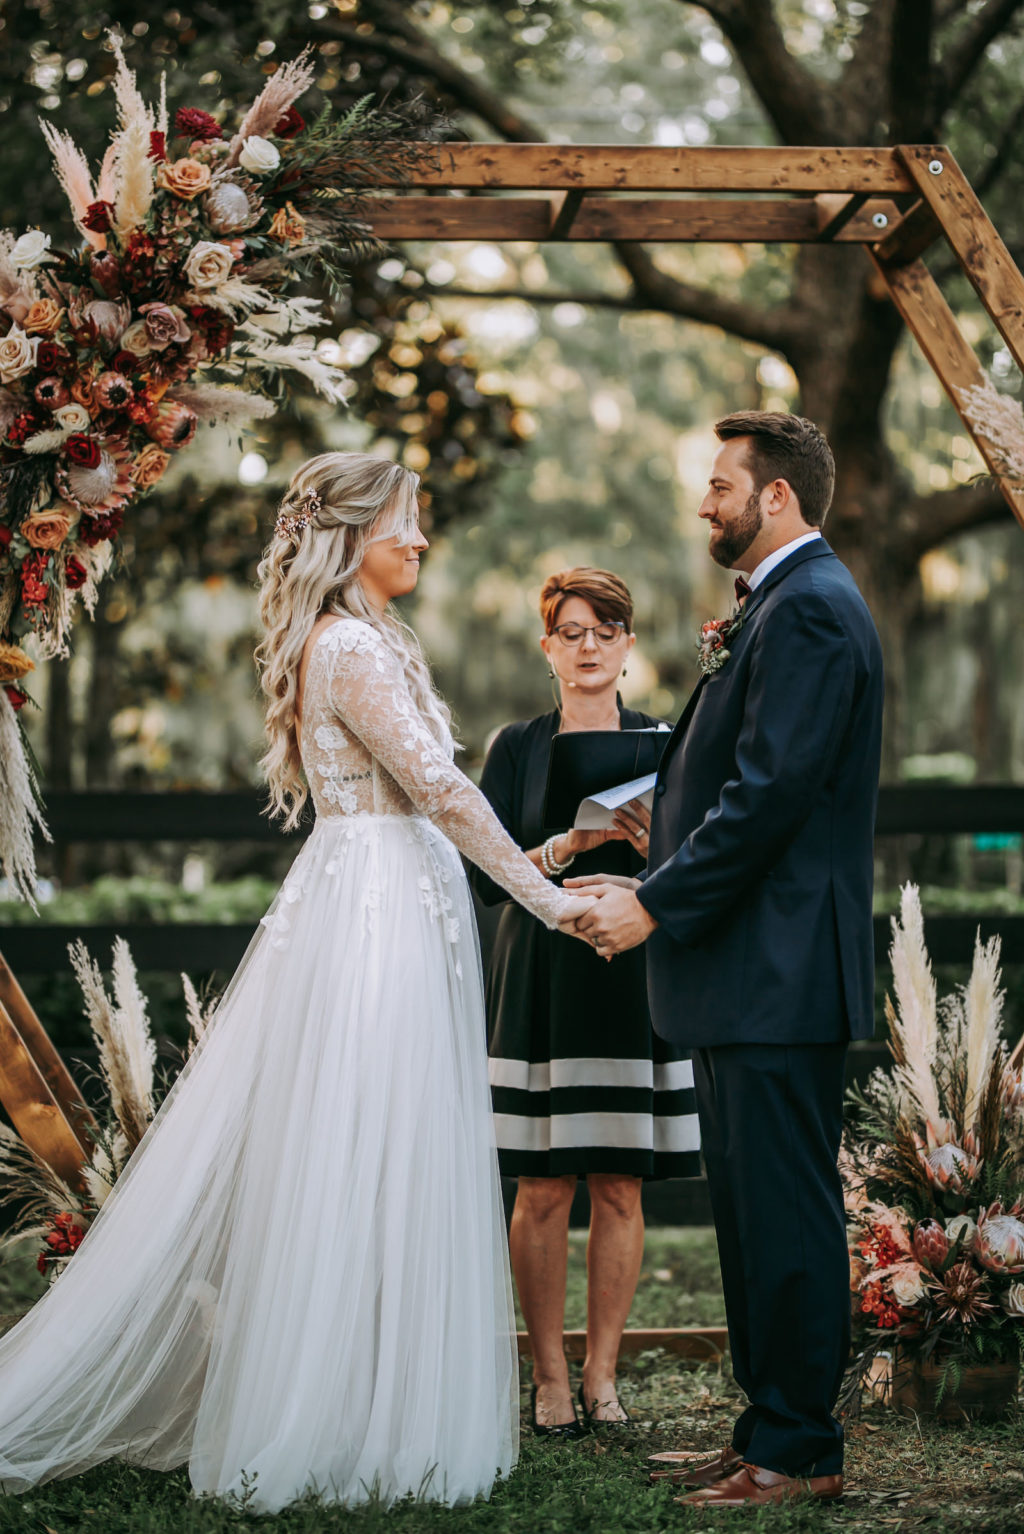 Rustic Florida Bride and Groom Exchanging Wedding Vows Under Wooden Hexagonal Ceremony Arch with Lush Floral Arrangements